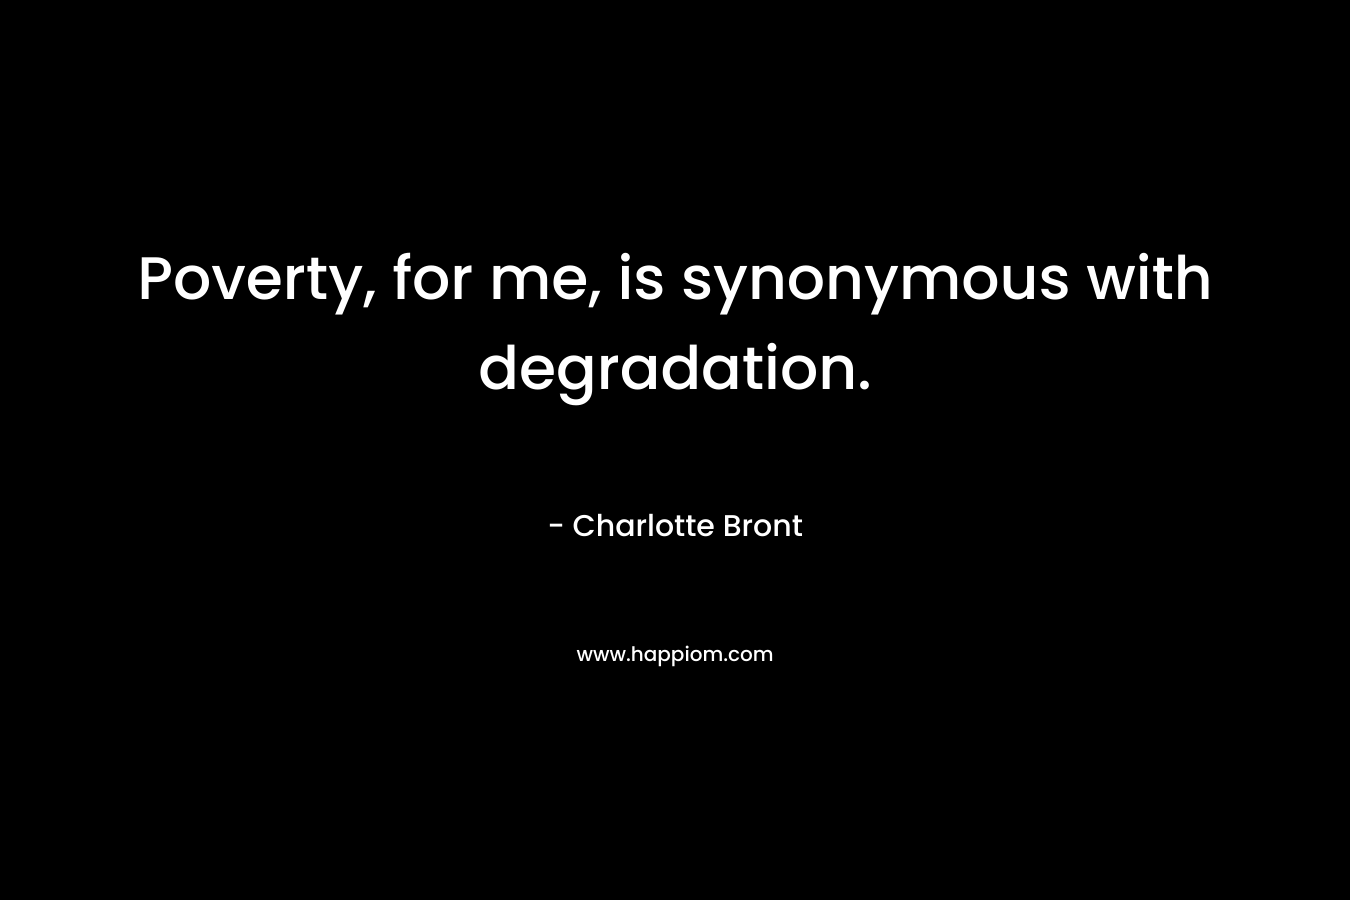 Poverty, for me, is synonymous with degradation. – Charlotte Bront